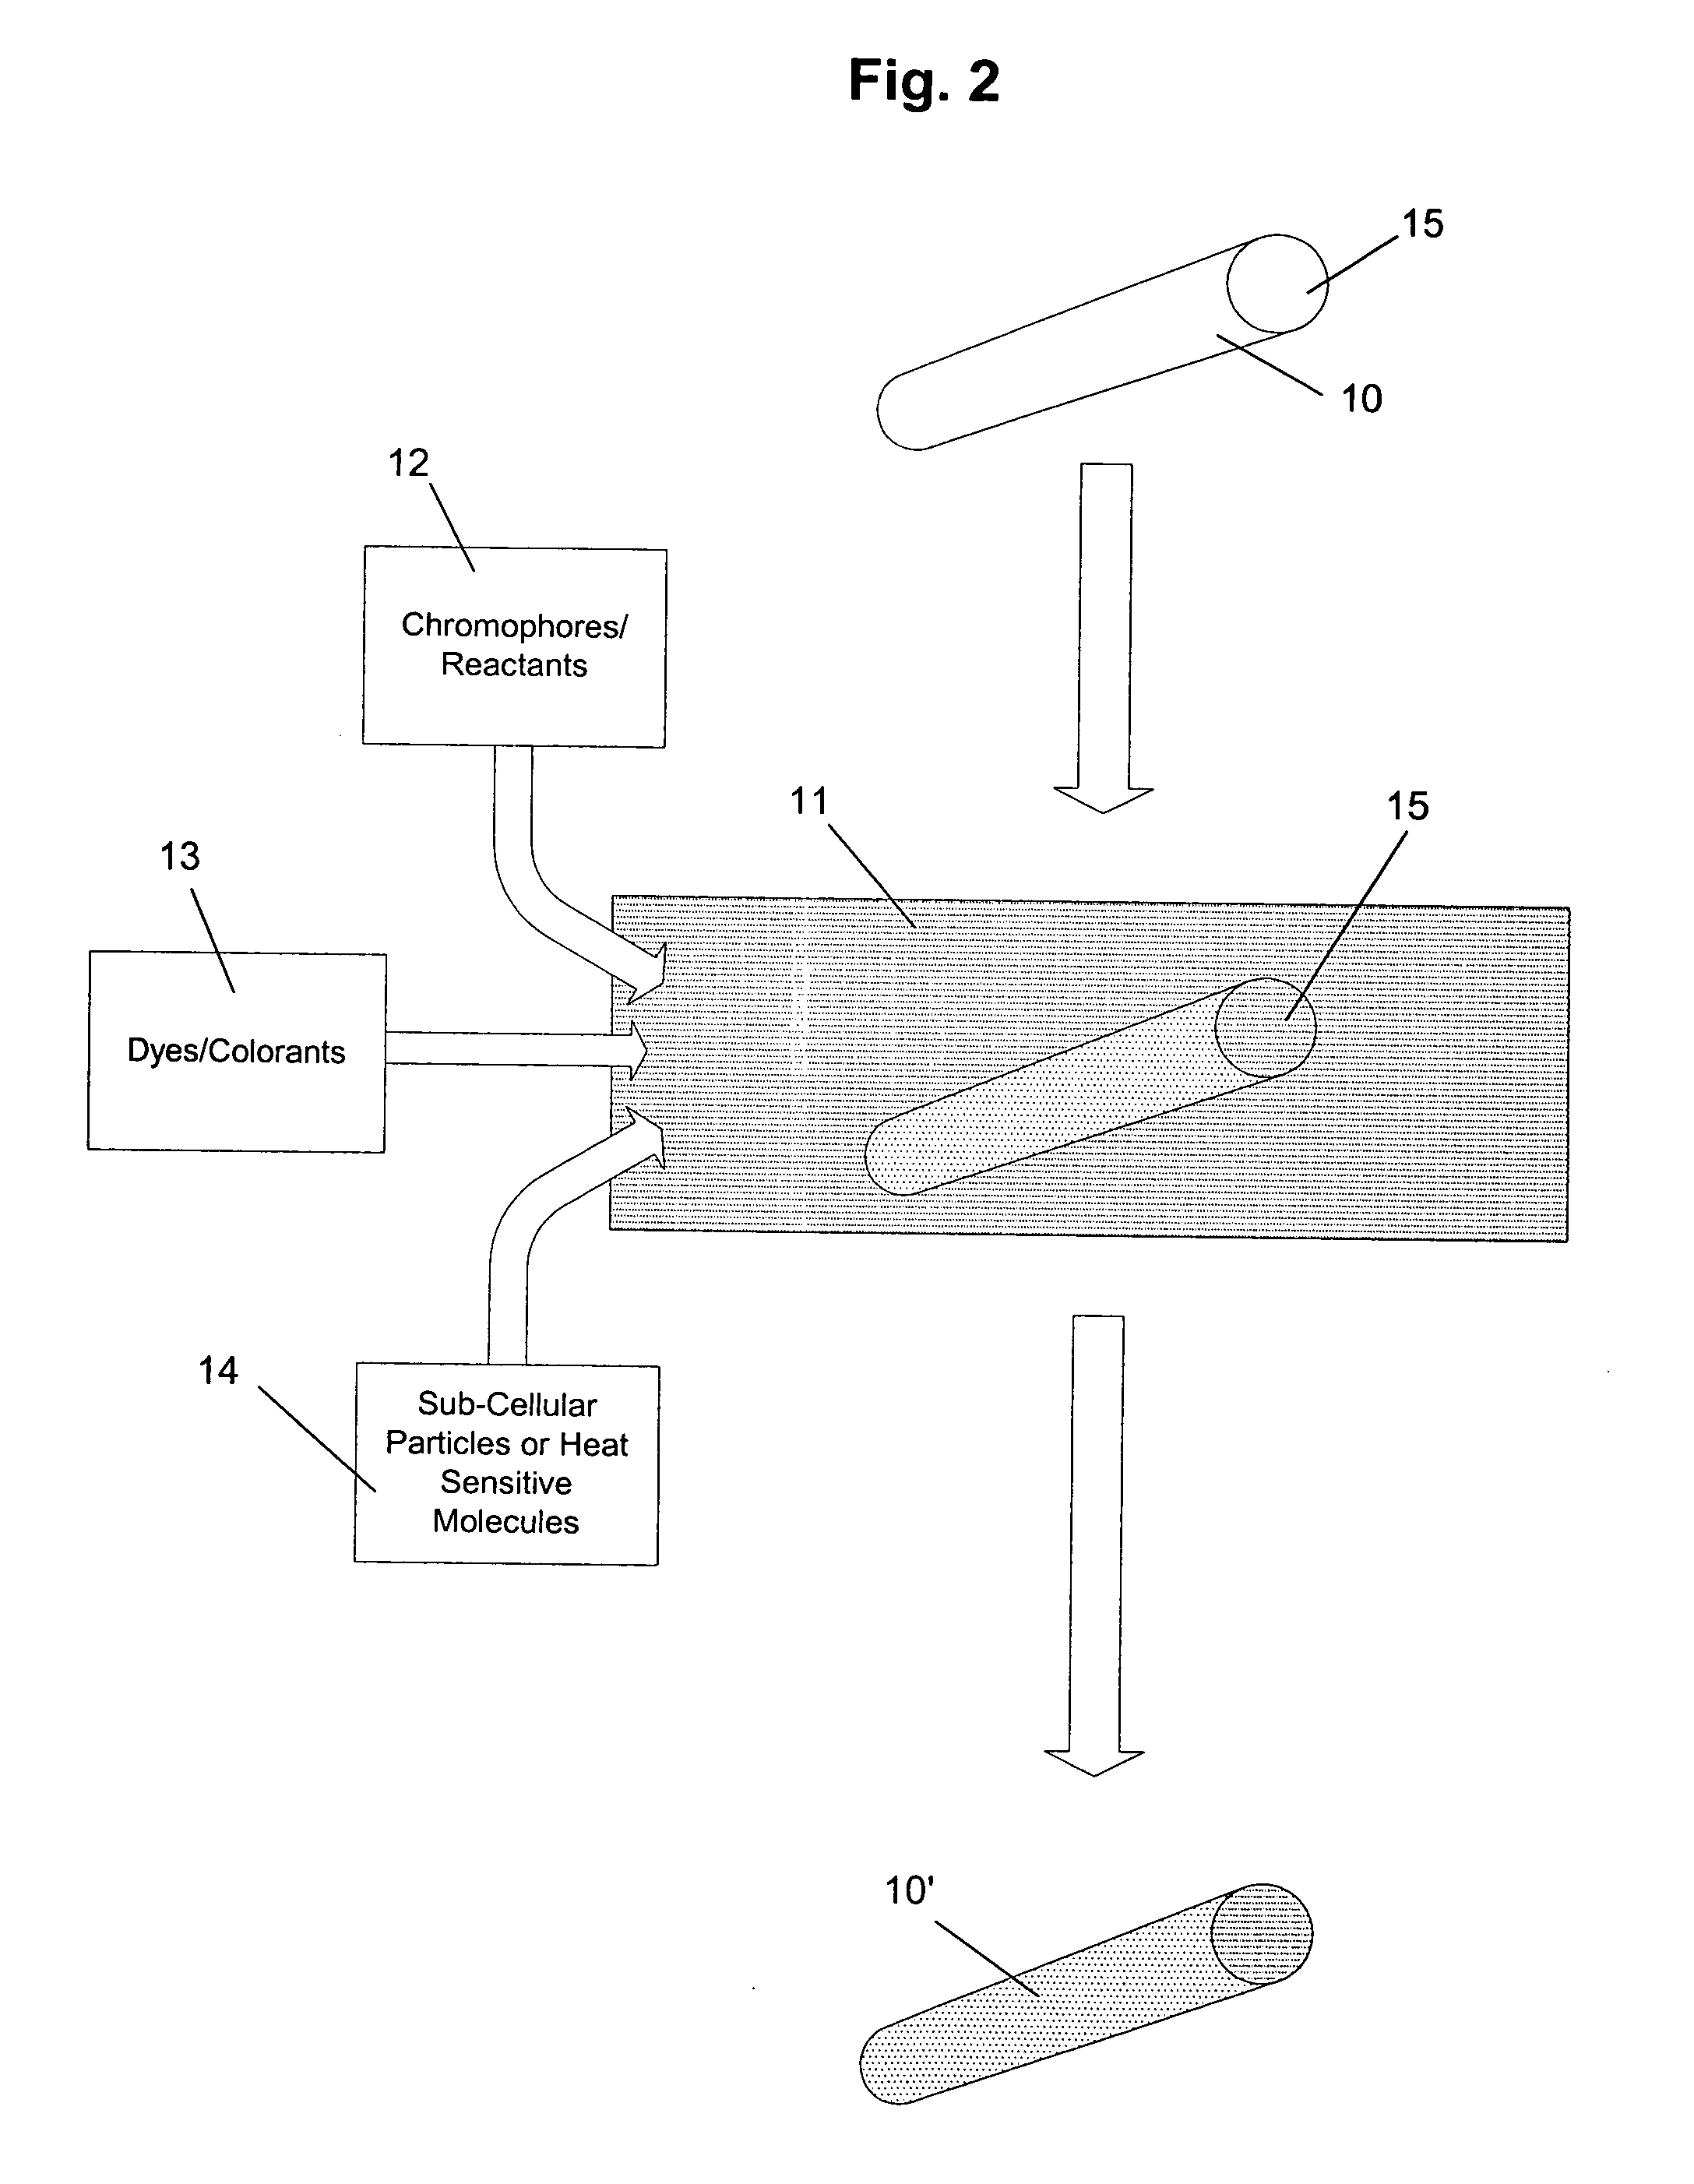 Methods of marking and testing pharmaceutical products